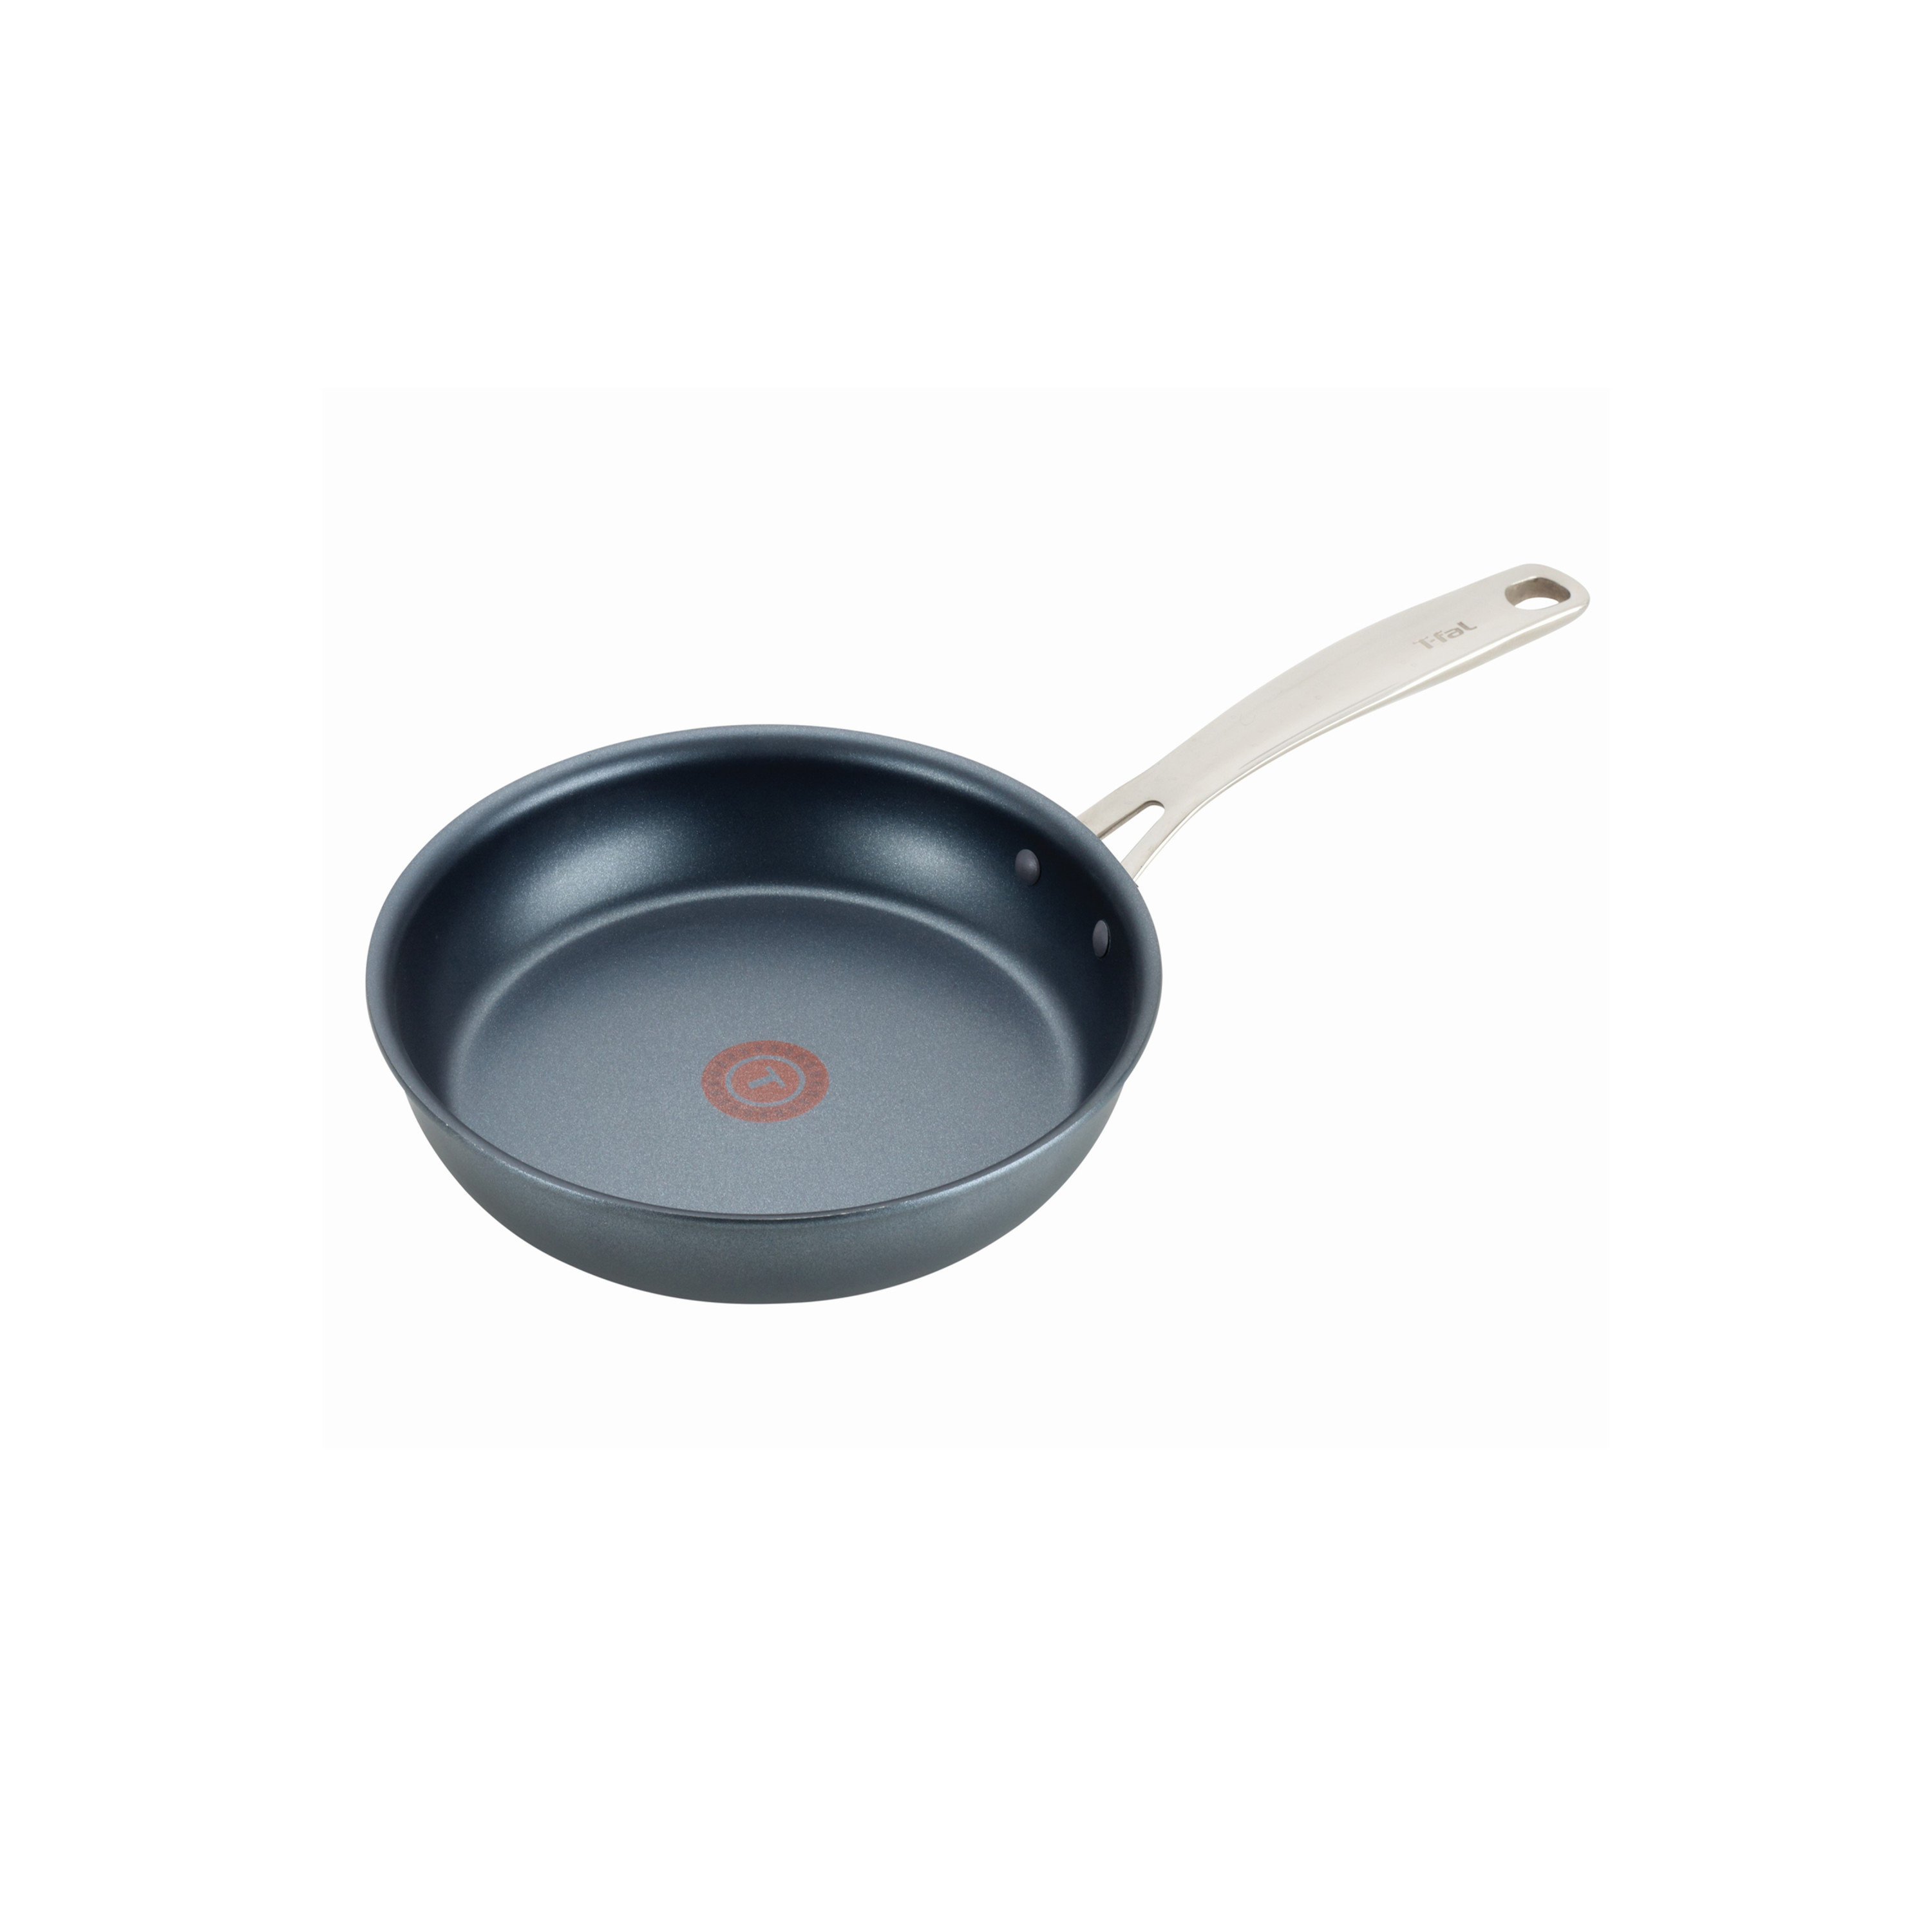 T-Fal Professional Nonstick 8 inch Fry Pan